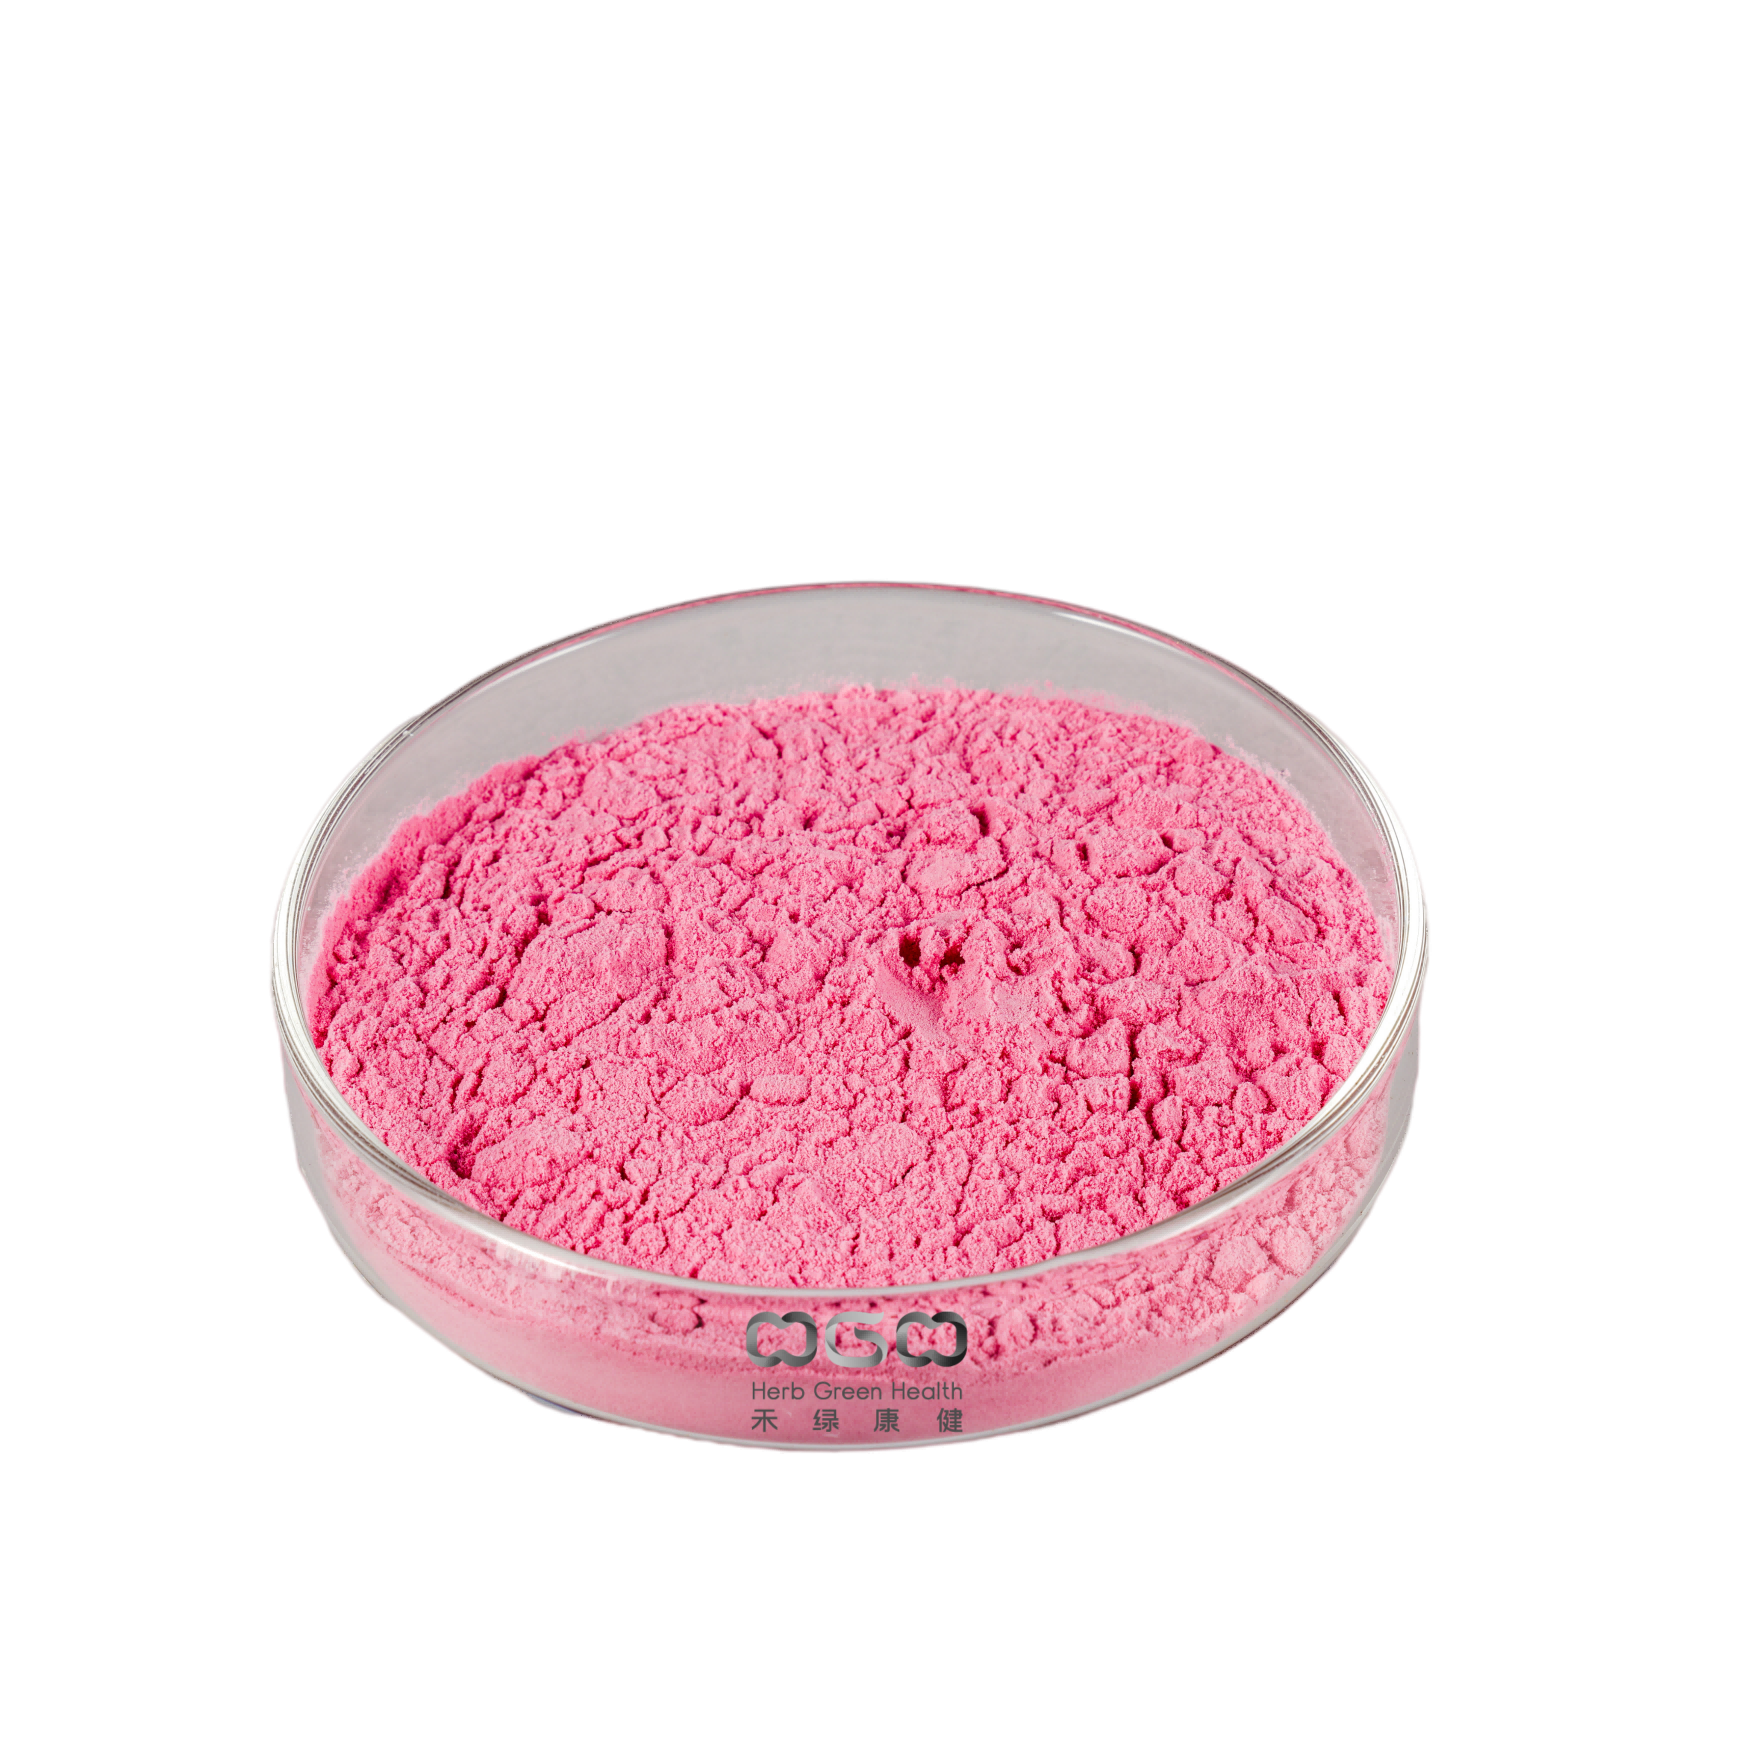 Anti-Aging Cranberry Fruit Extract Powder